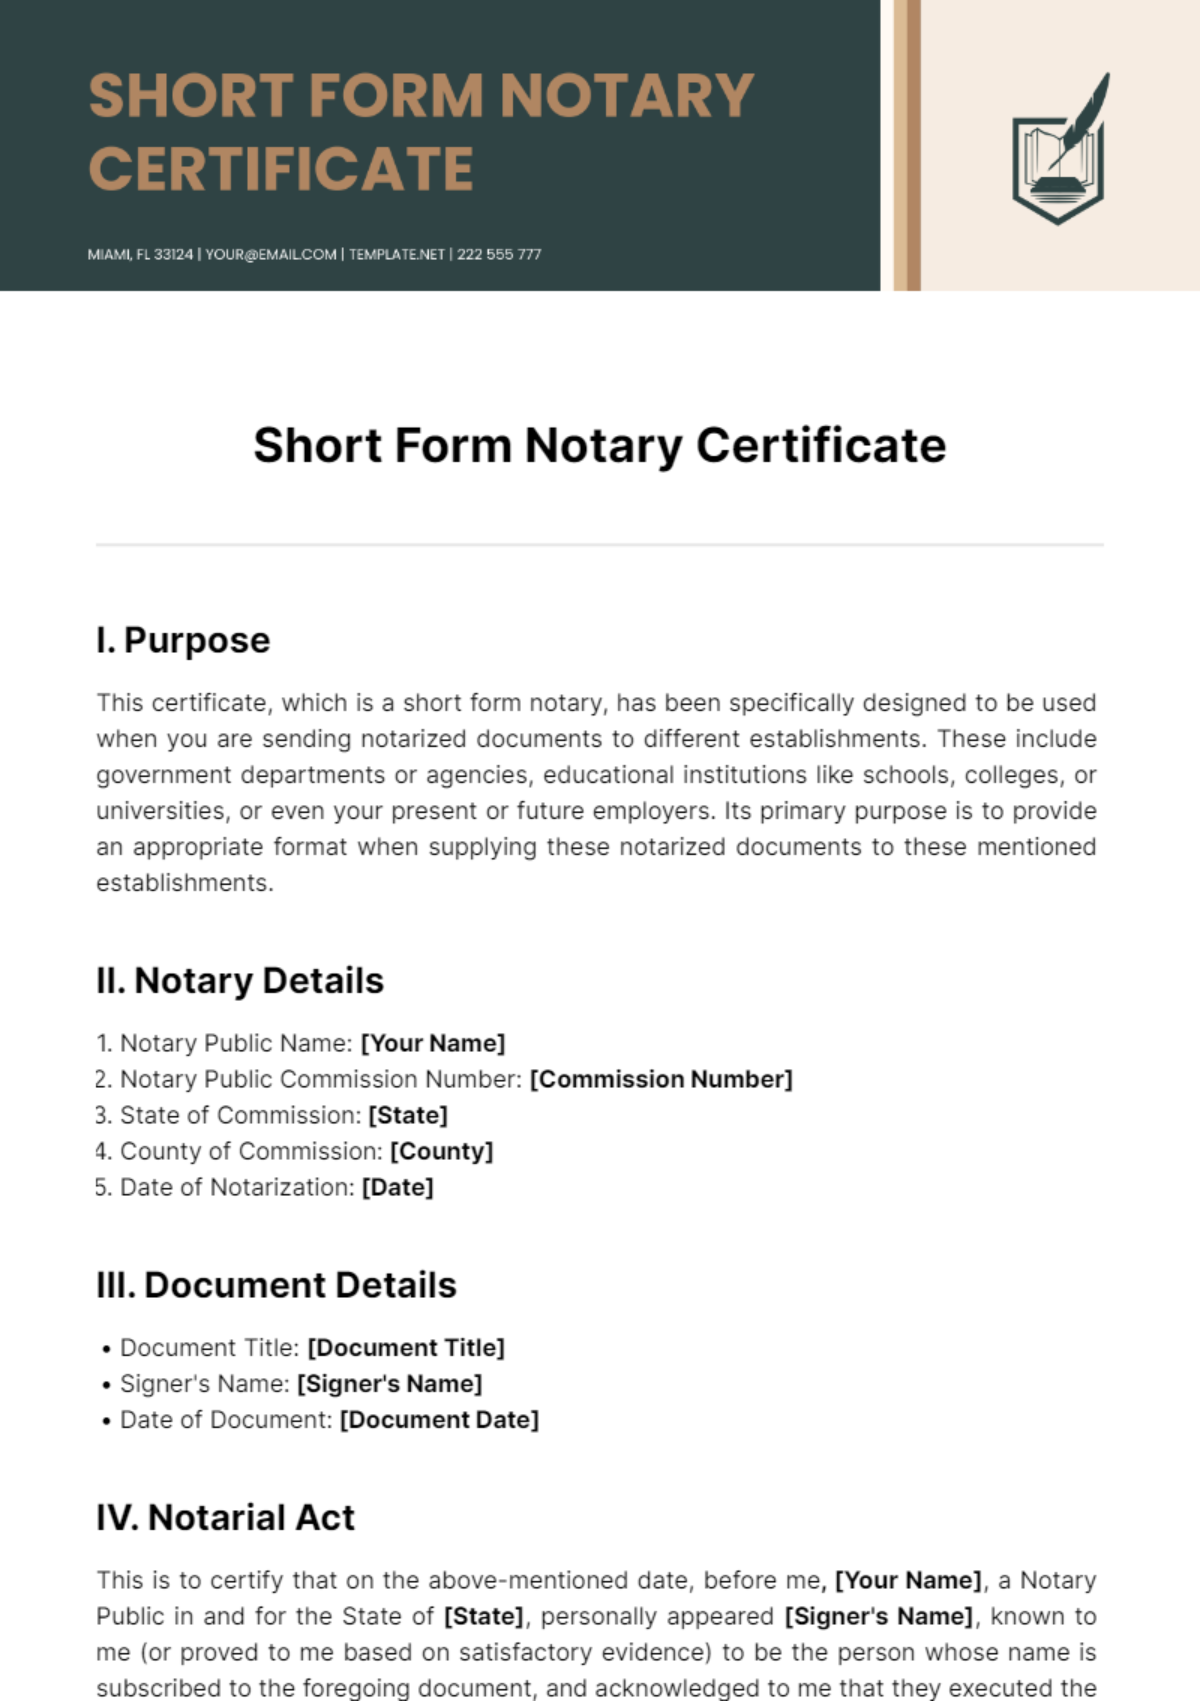 Short Form Notary Certificate Template